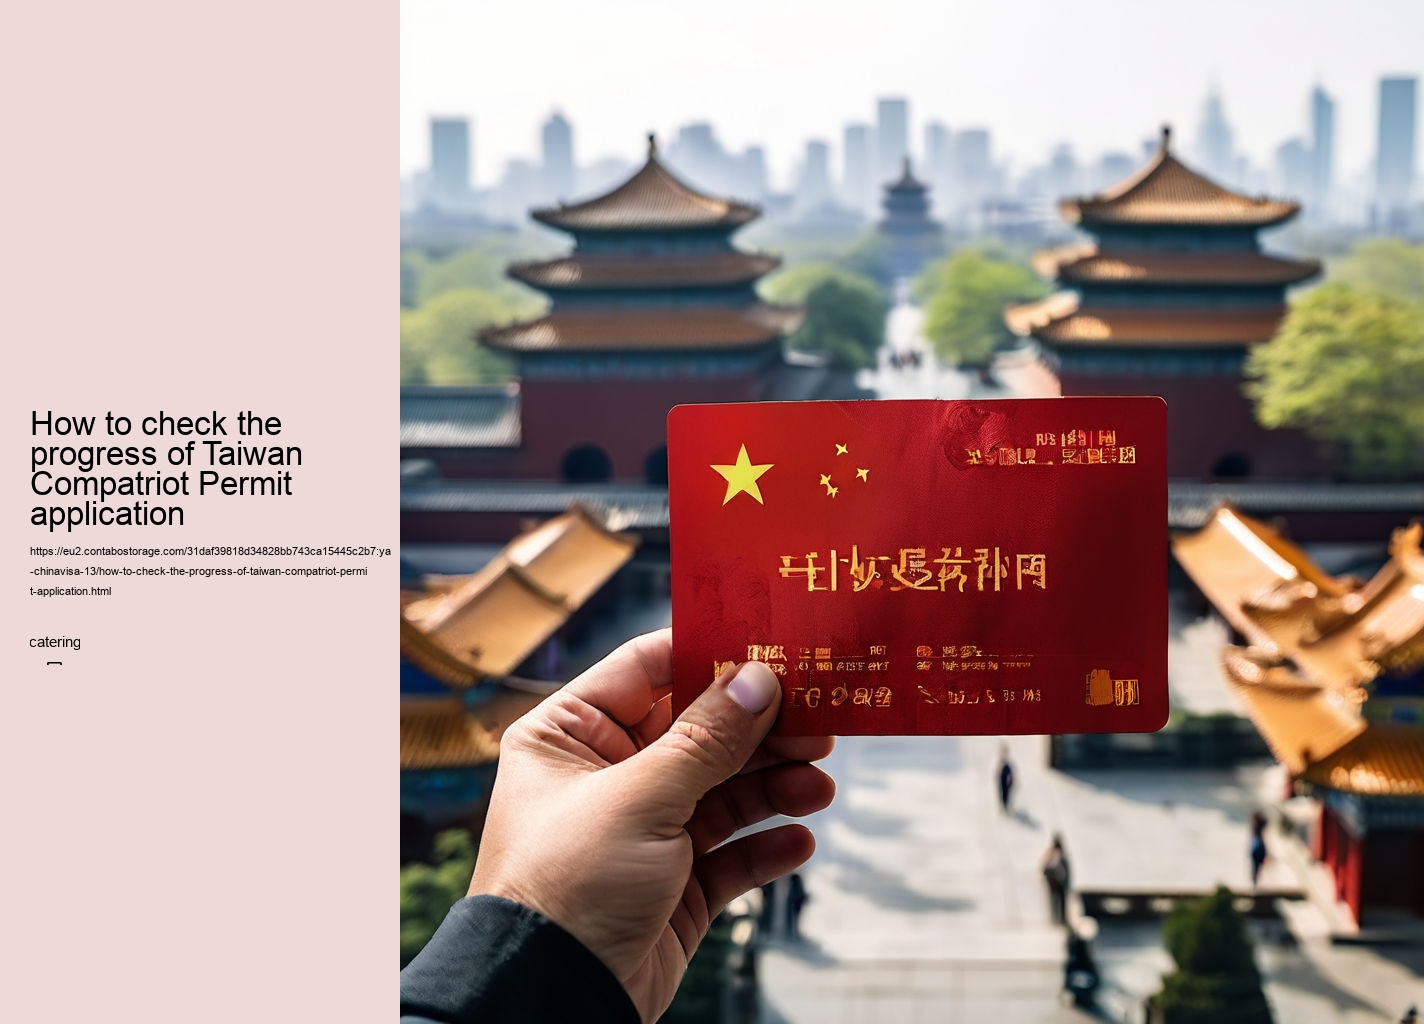 How to check the progress of Taiwan Compatriot Permit application